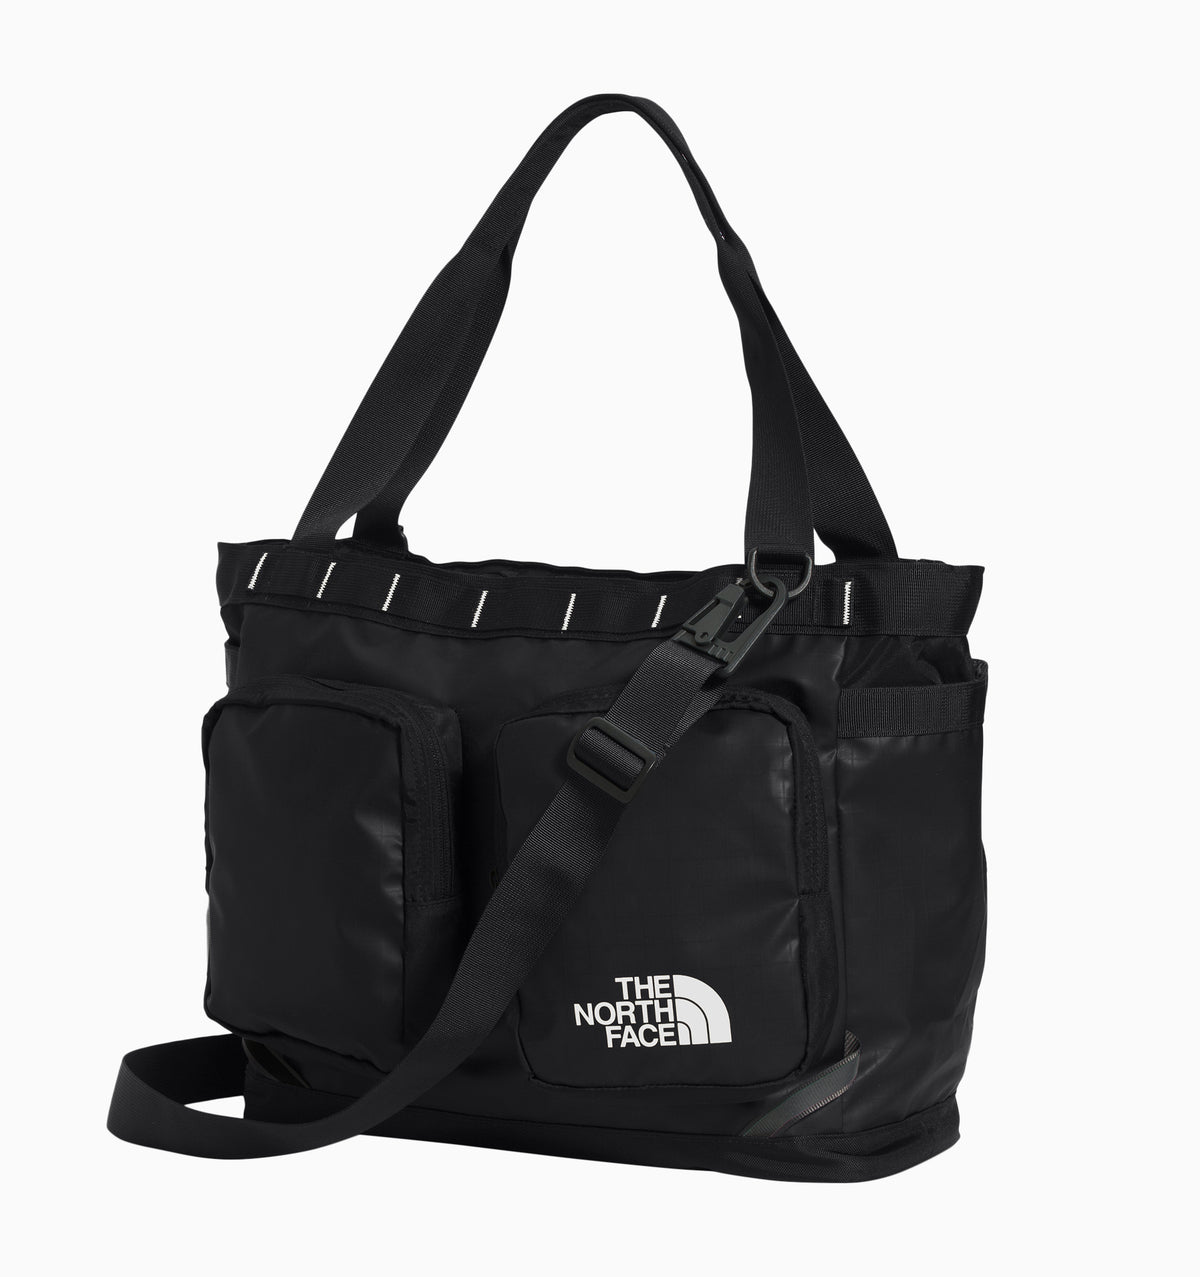 The North Face 16" Base Camp Voyager Tote 25L - Black